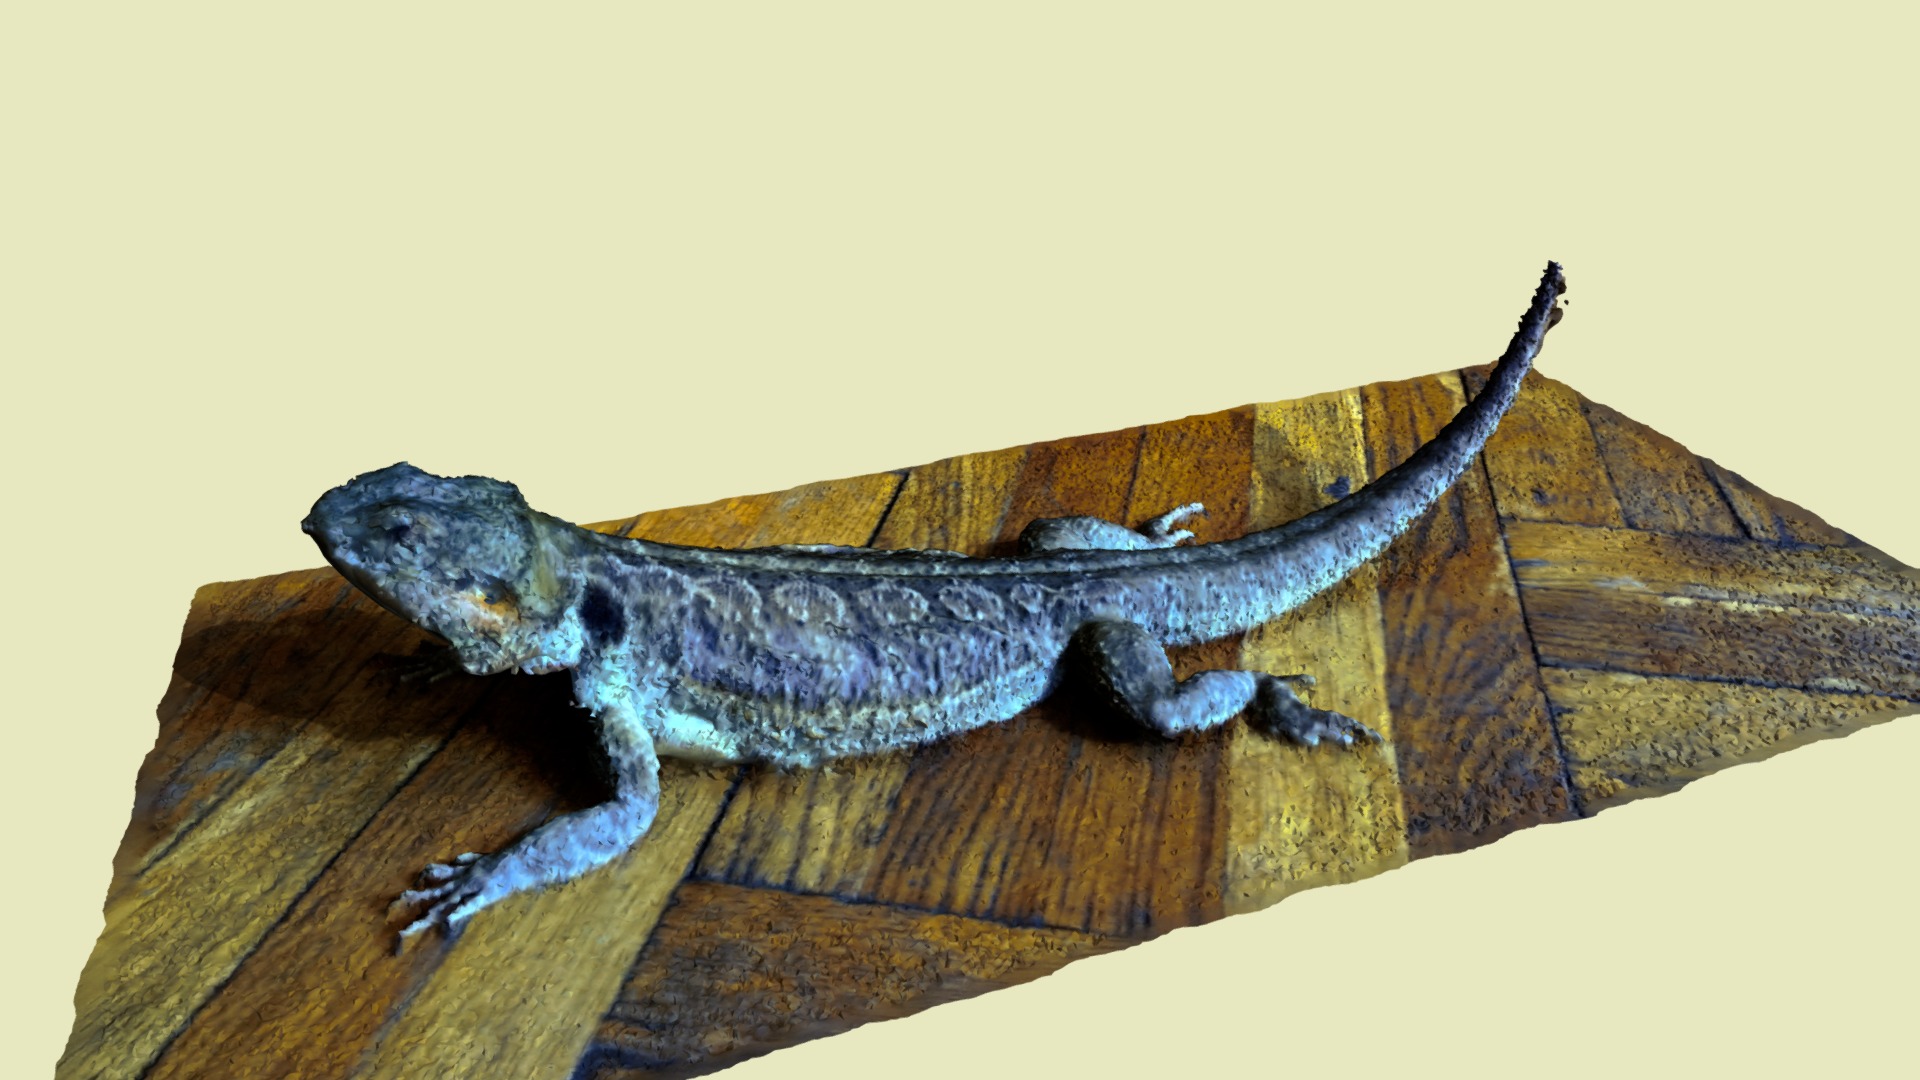 3D model Dornan The Agama - This is a 3D model of the Dornan The Agama. The 3D model is about a lizard on a log.